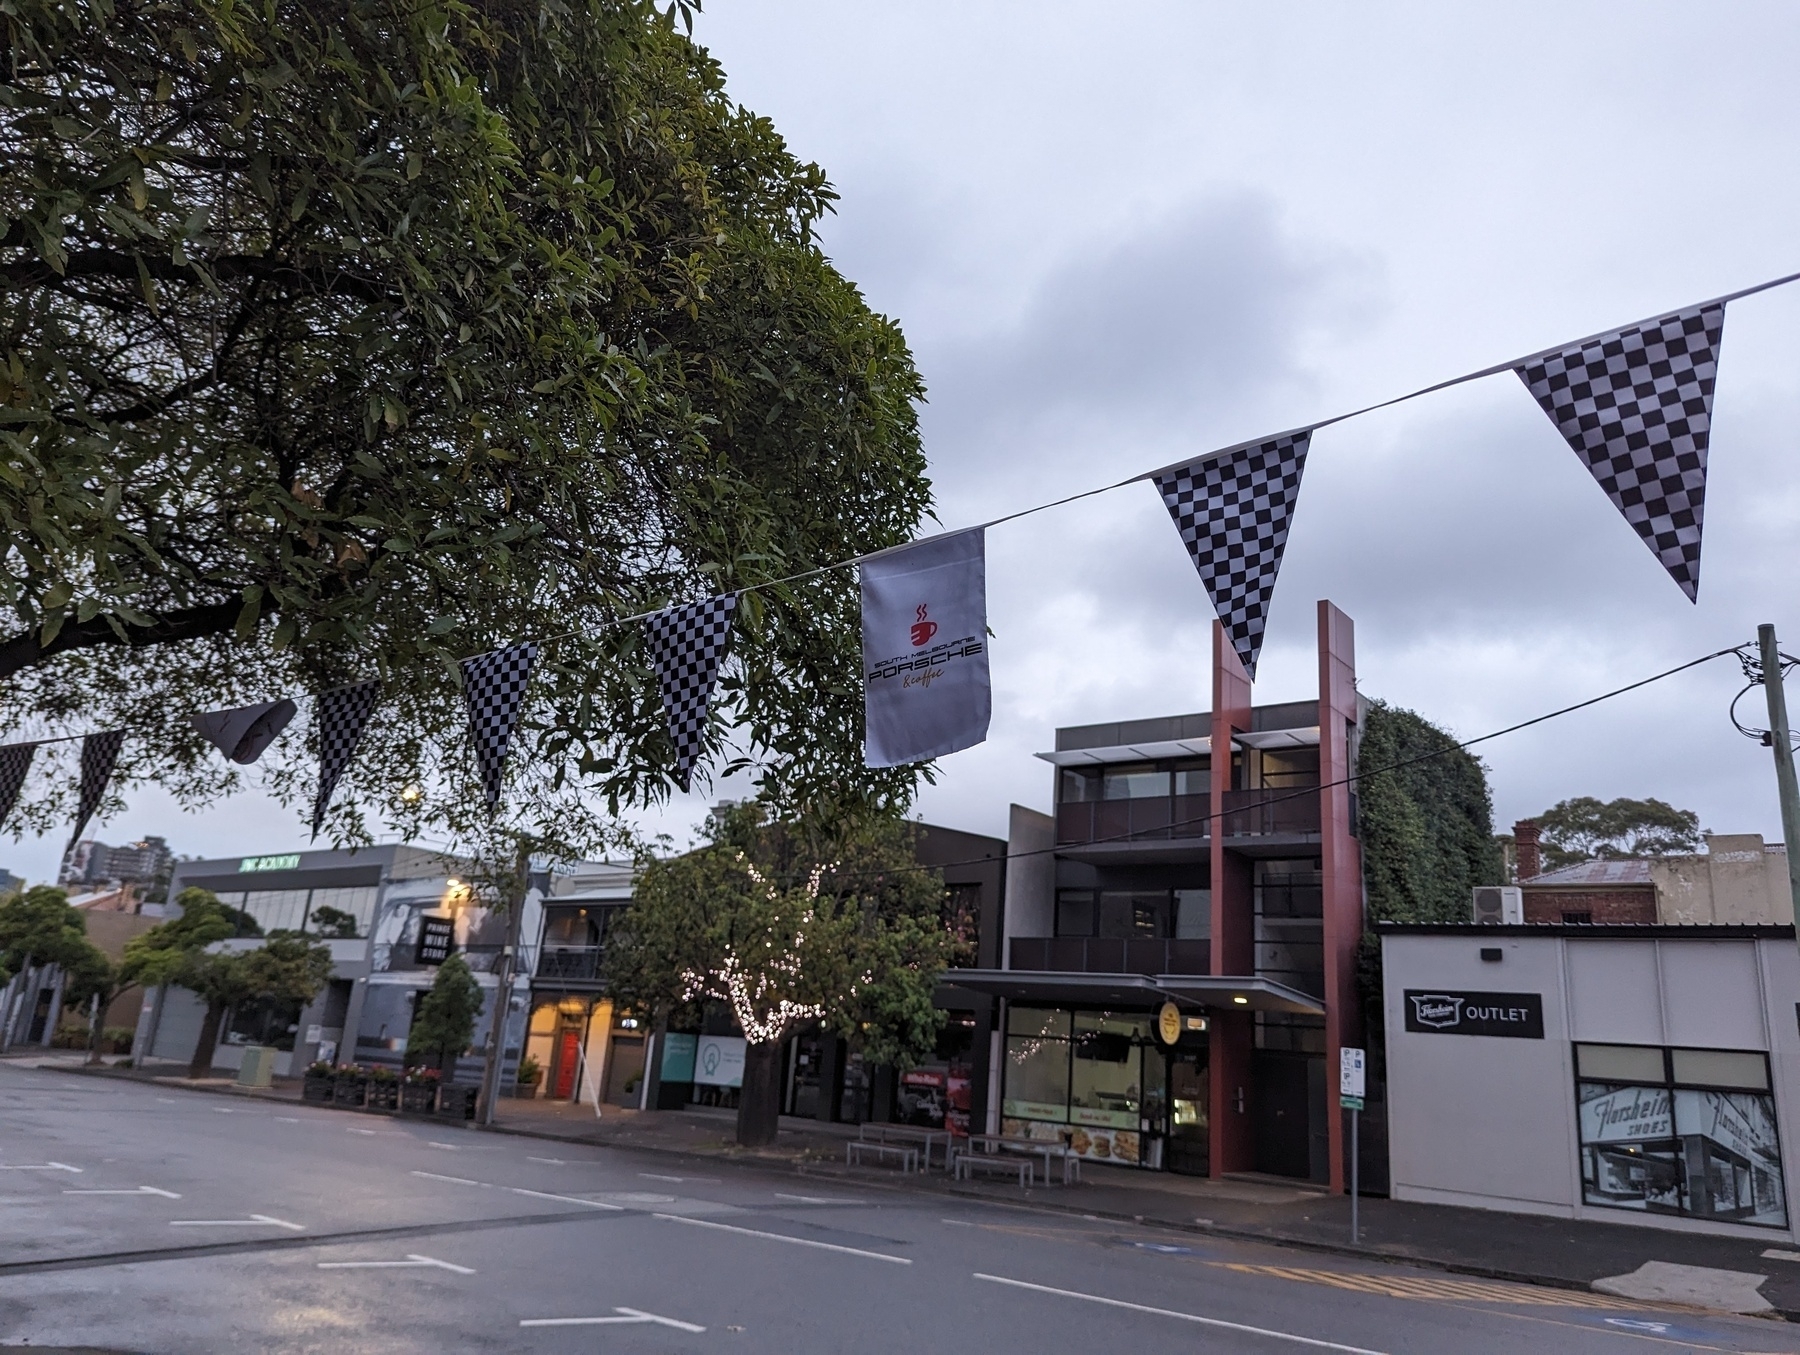 Bunting strung up in the street with a Grand Prix theme, including checkered flags.